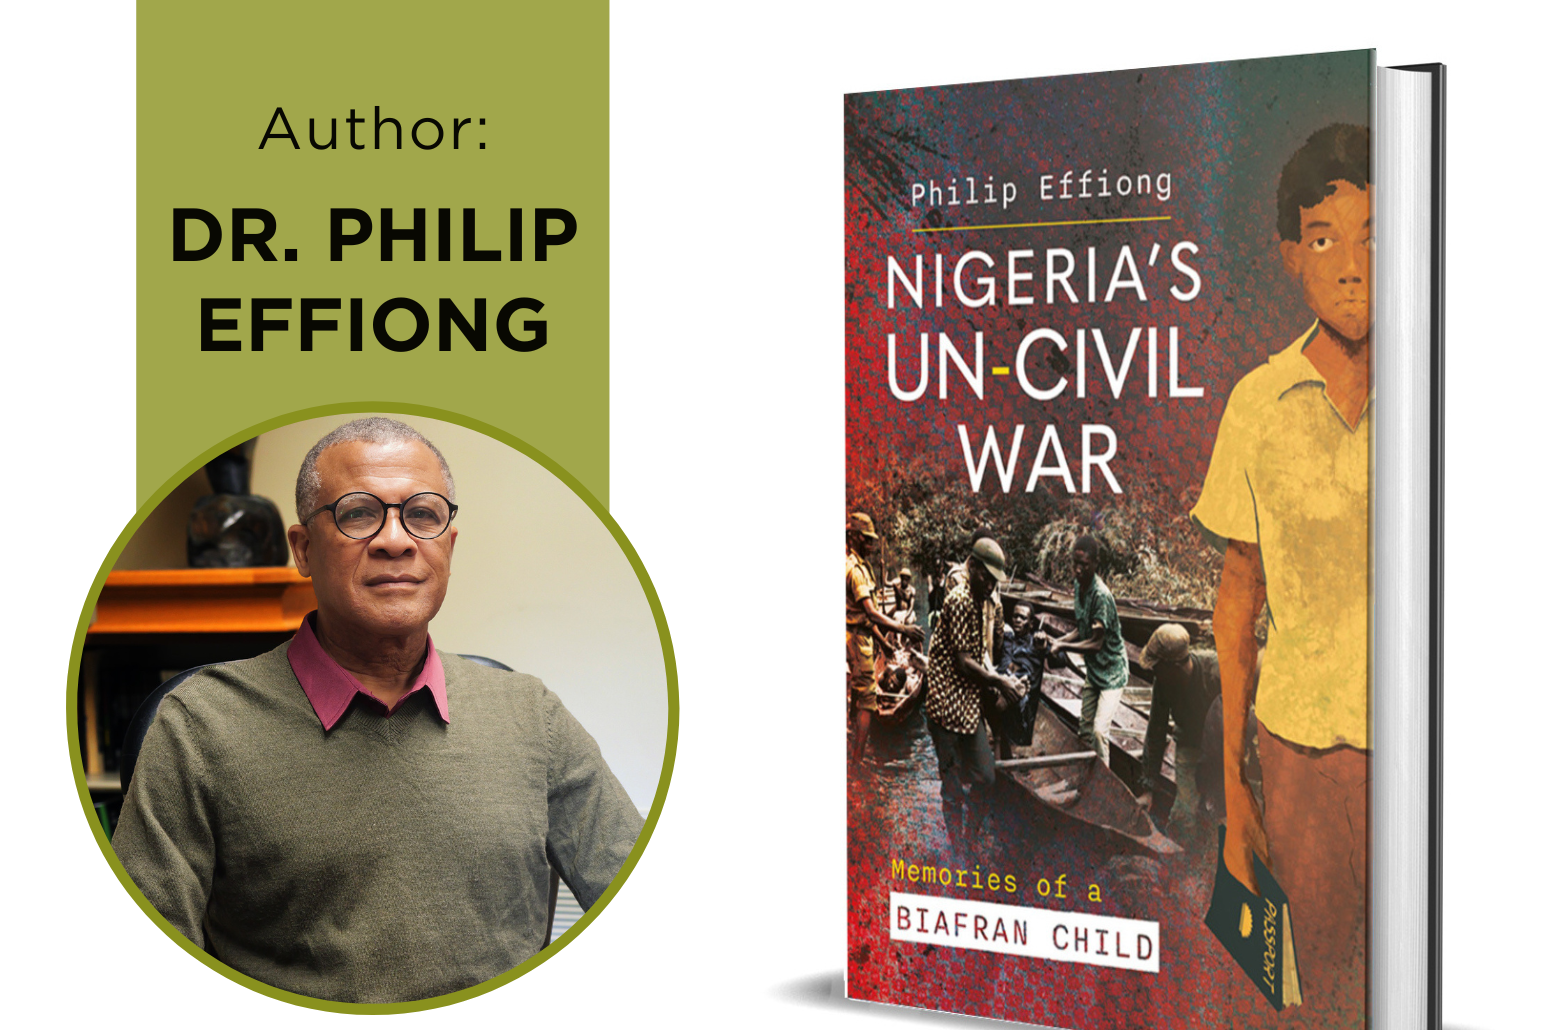 A portrait of a man in glasses is on the left under the words: "Author: Dr. Philip Effiong." On the right is a photo of a book cover with featuring an illustration of a boy and the title: "Nigeria's Un-civil War: Memories of a Biafran Child." The book author is Philip Effiong.